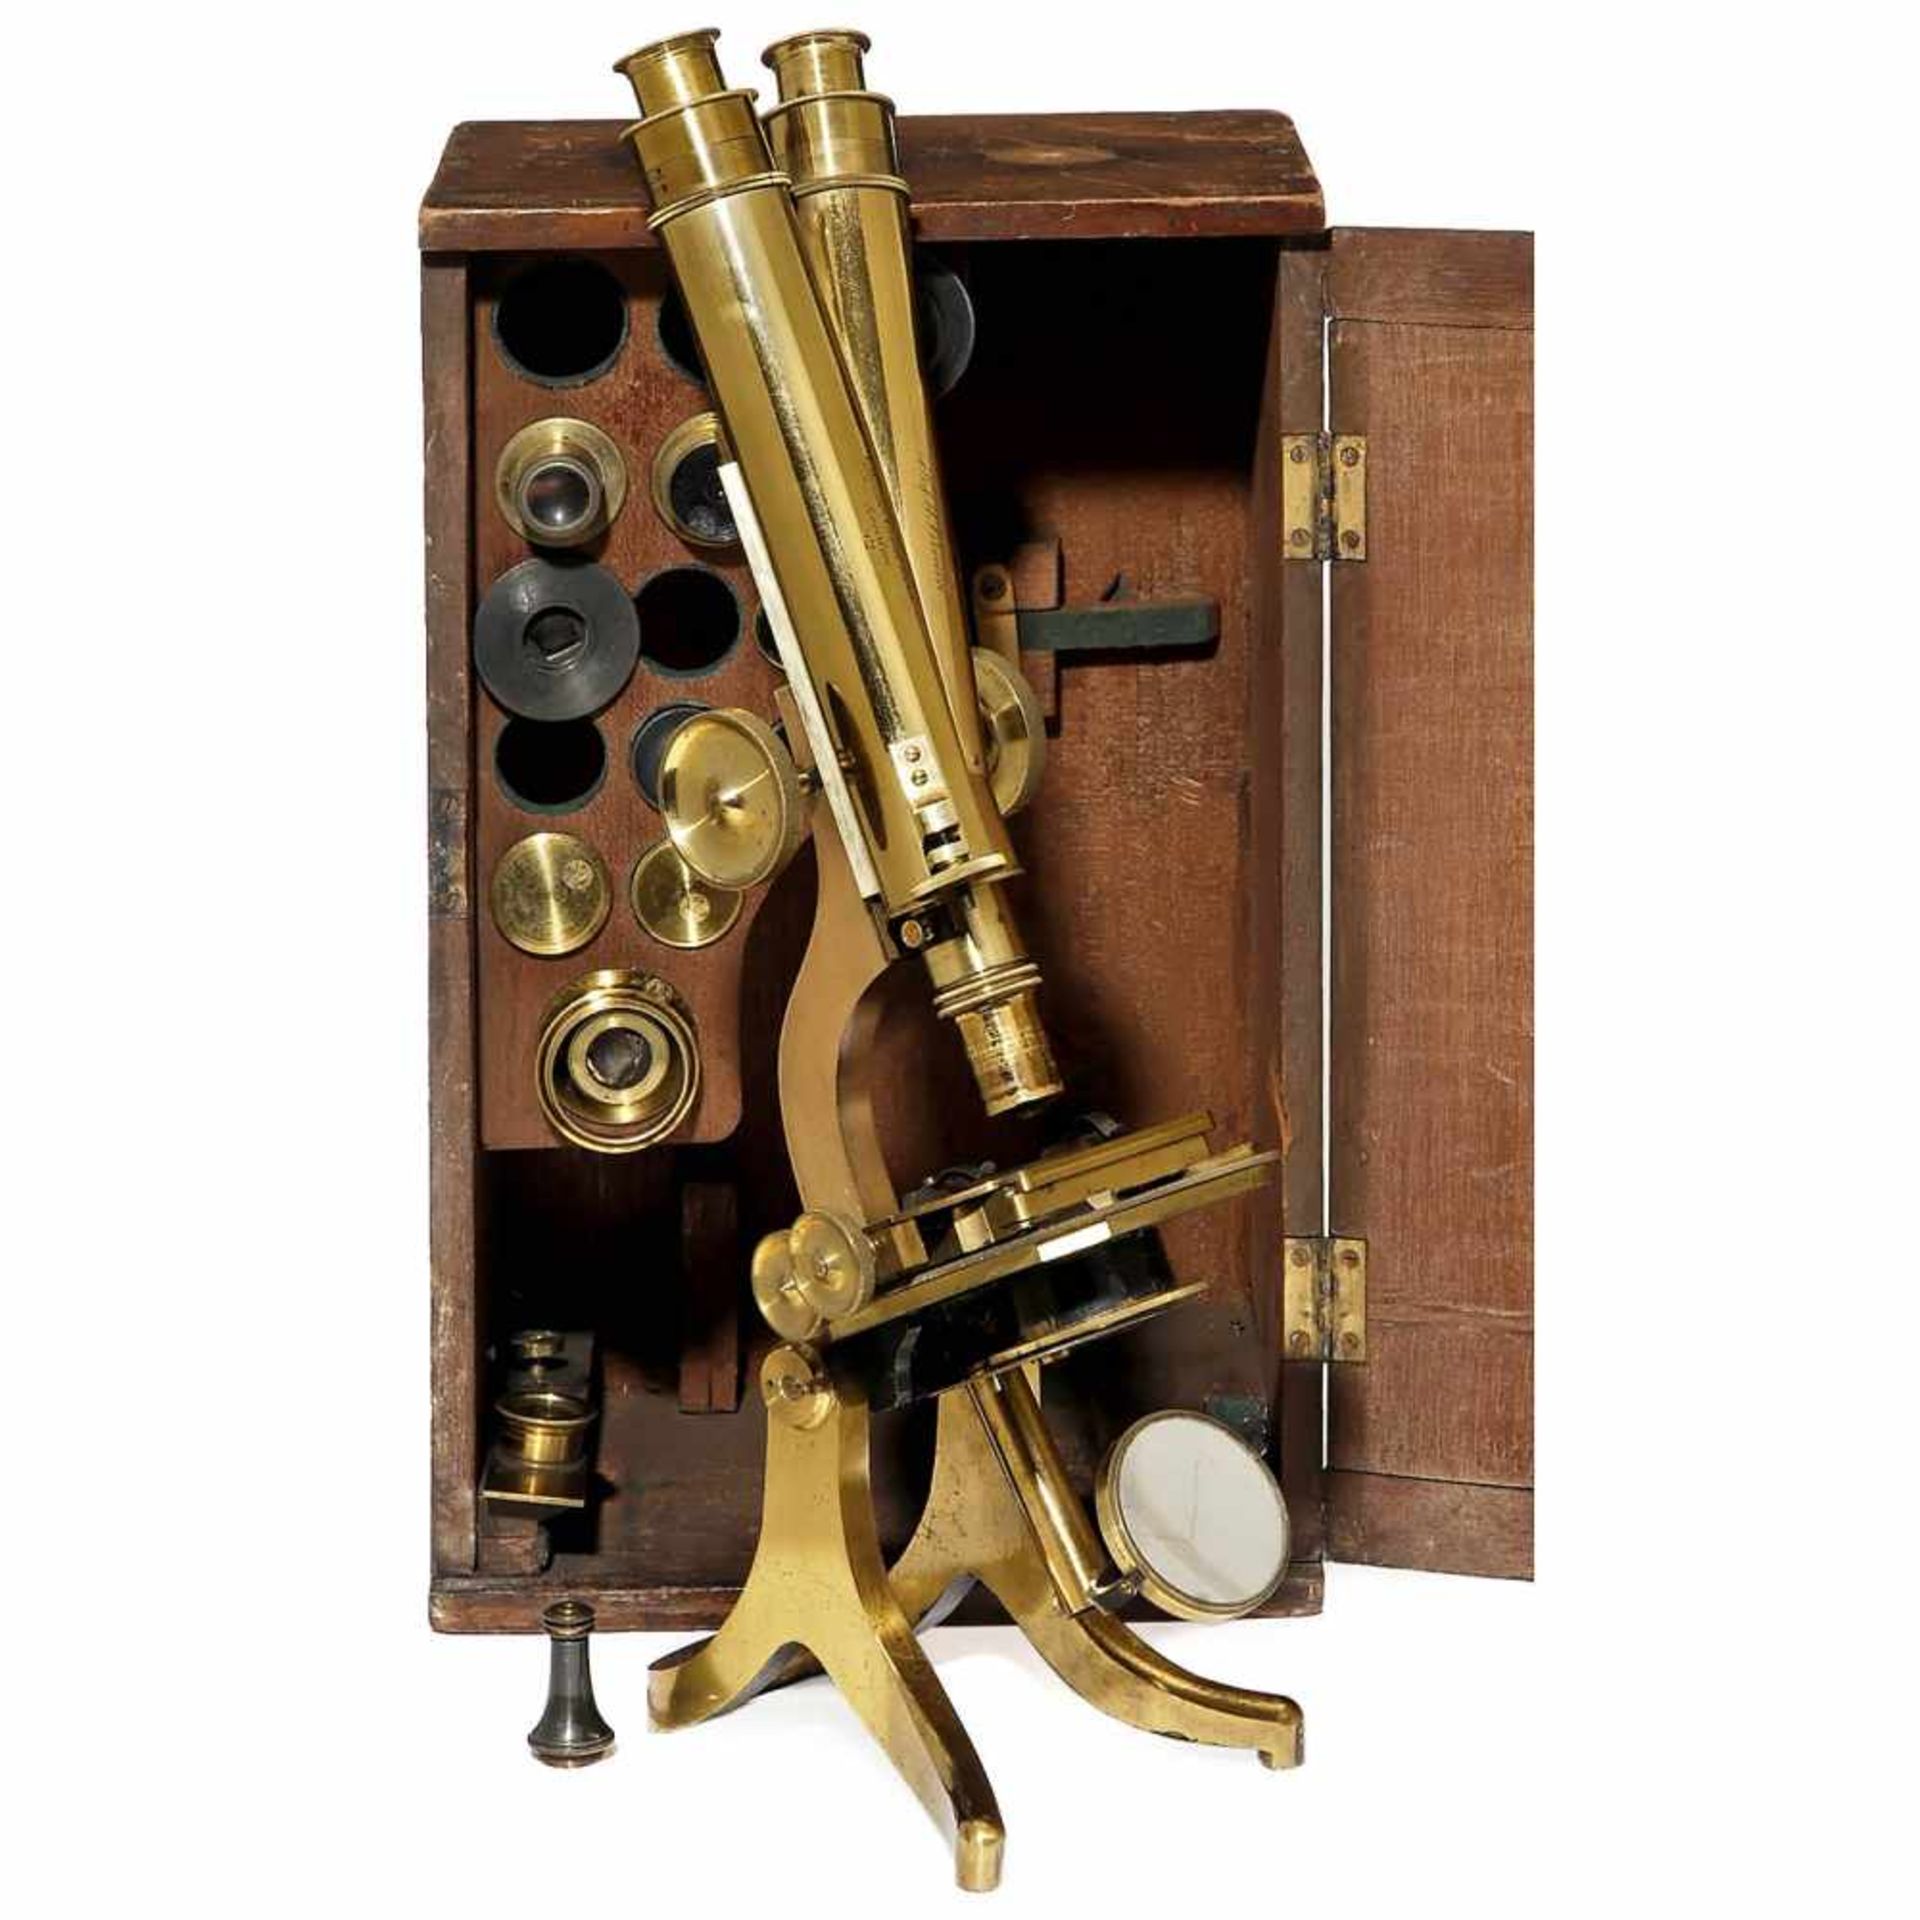 Binocular Microscope by "H. & W. Crouch, London", c. 1864Signed "H. & W. Crouch, Regents Canal Dock,